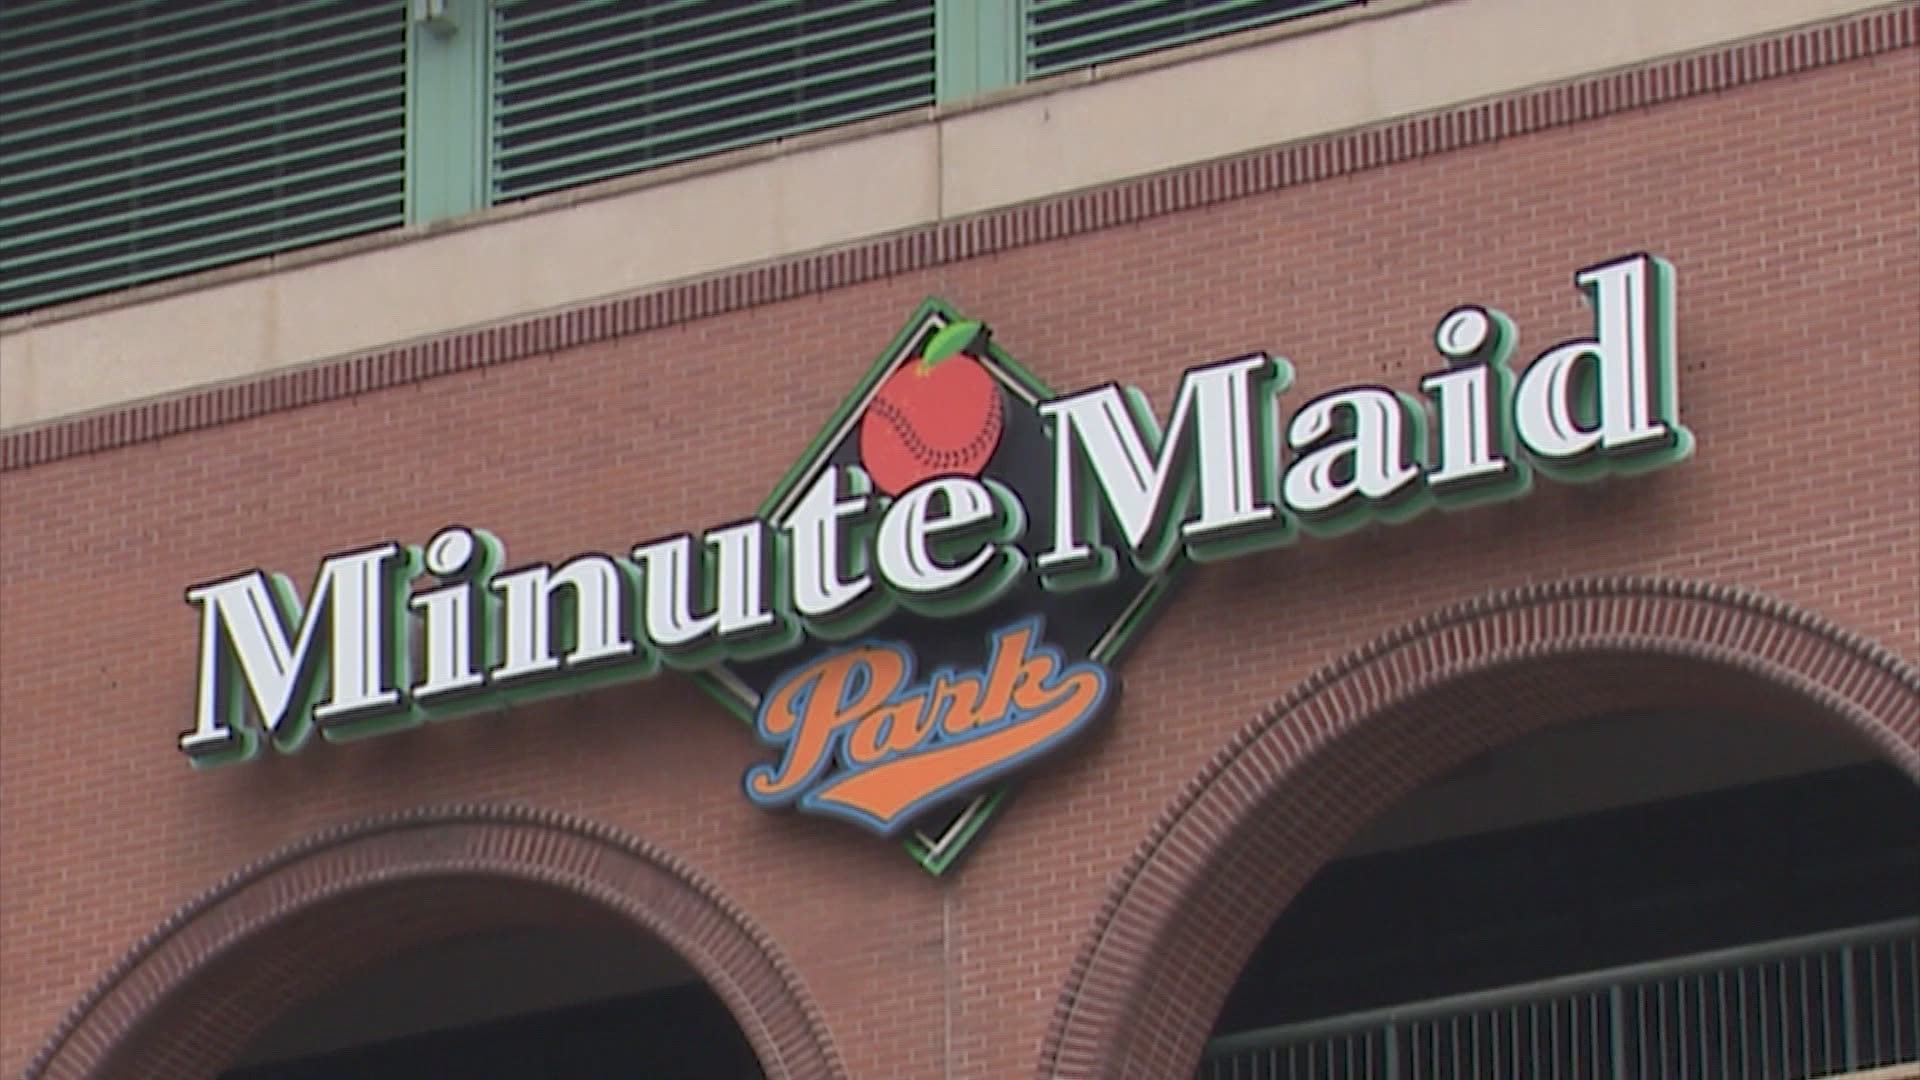 The Houston Astros said they are increasing to maximum capacity at Minute Maid Park, starting with the series against the Los Angeles Dodgers on May 25.